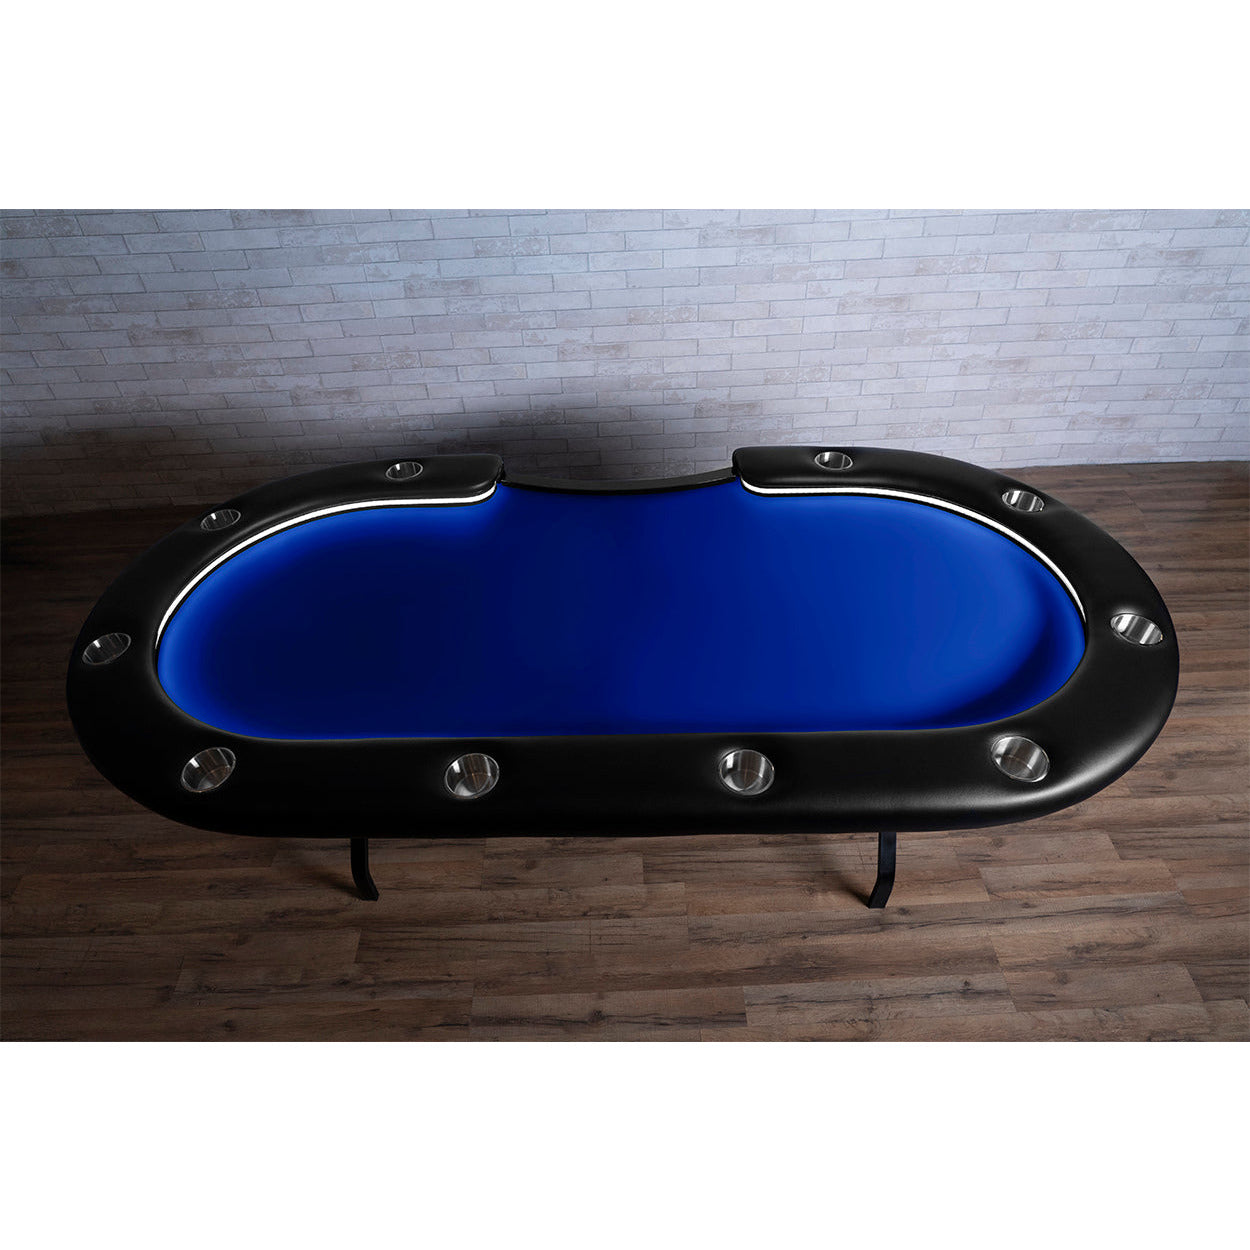 BBO The Aces Pro Alpha Folding Poker Table blue top view 